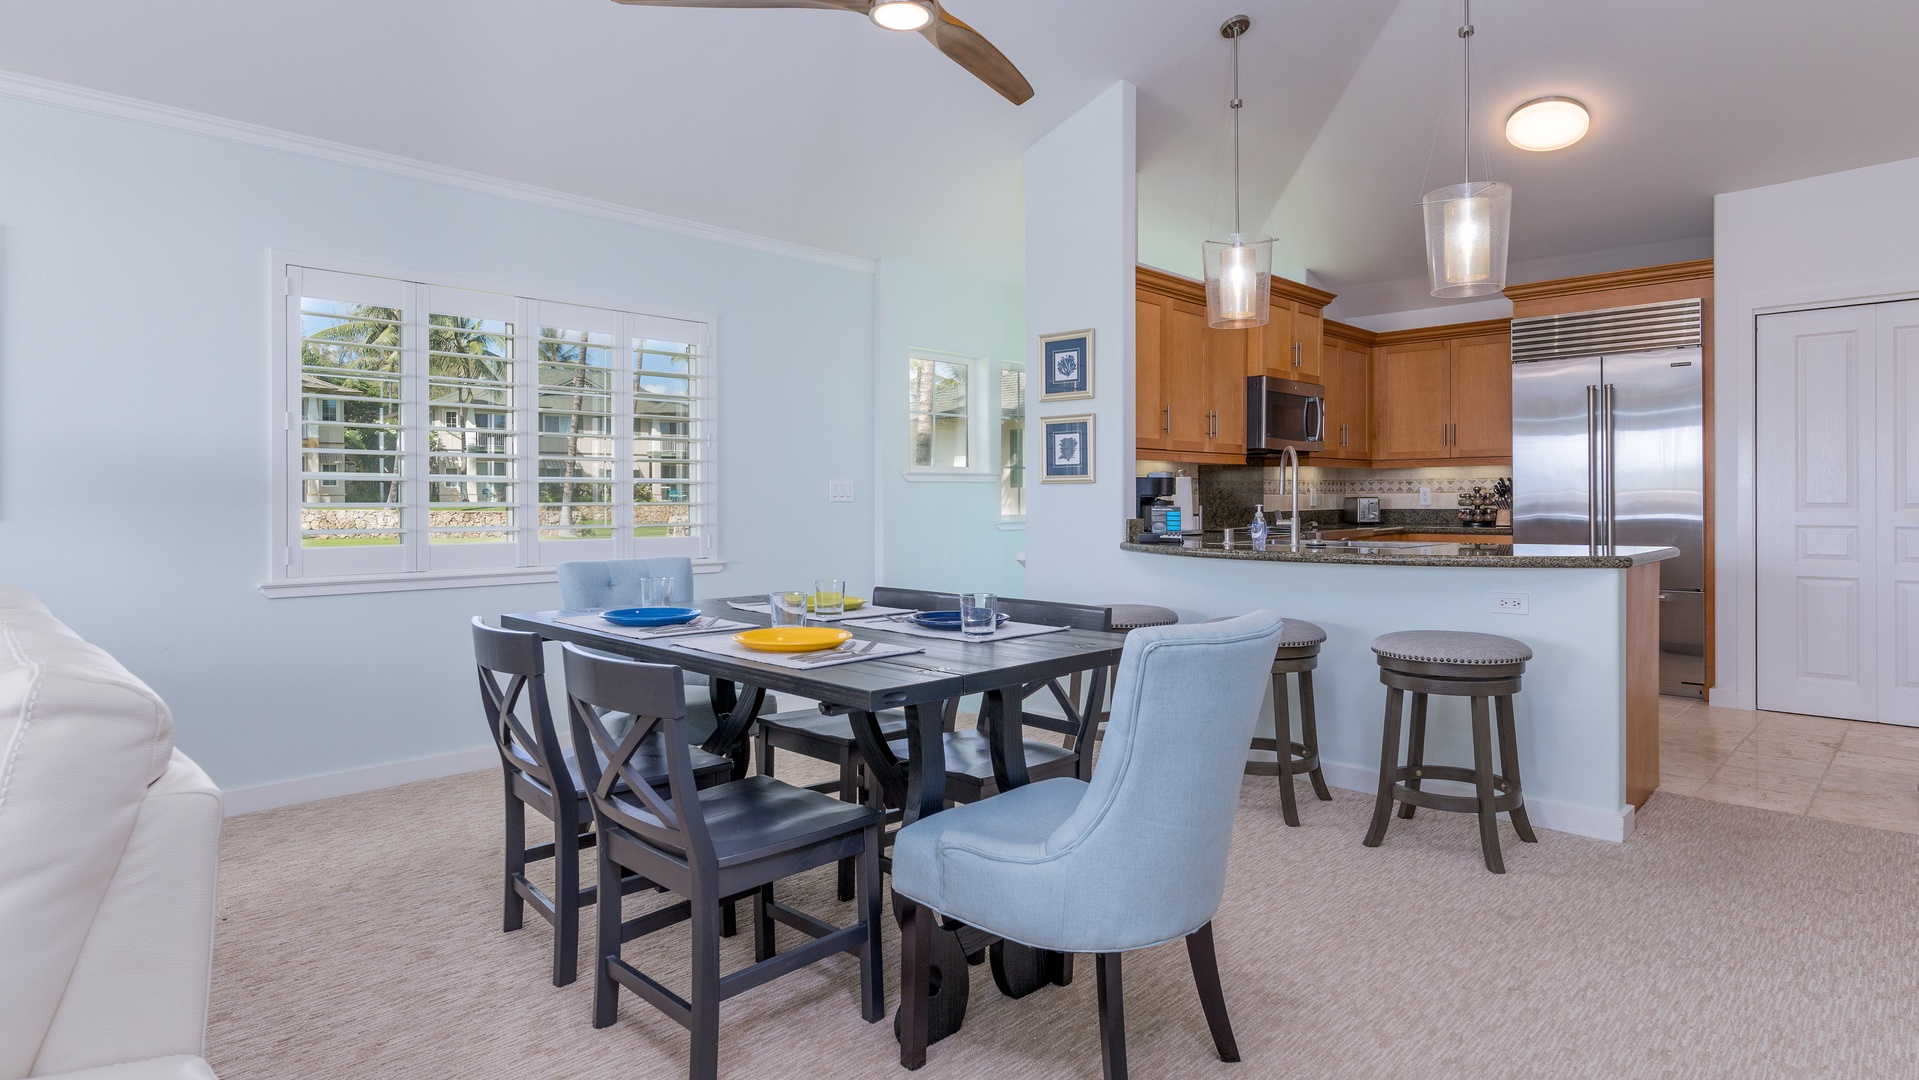 Kapolei Vacation Rentals, Kai Lani 21C - Expansive space includes the kitchen, living and dining areas.